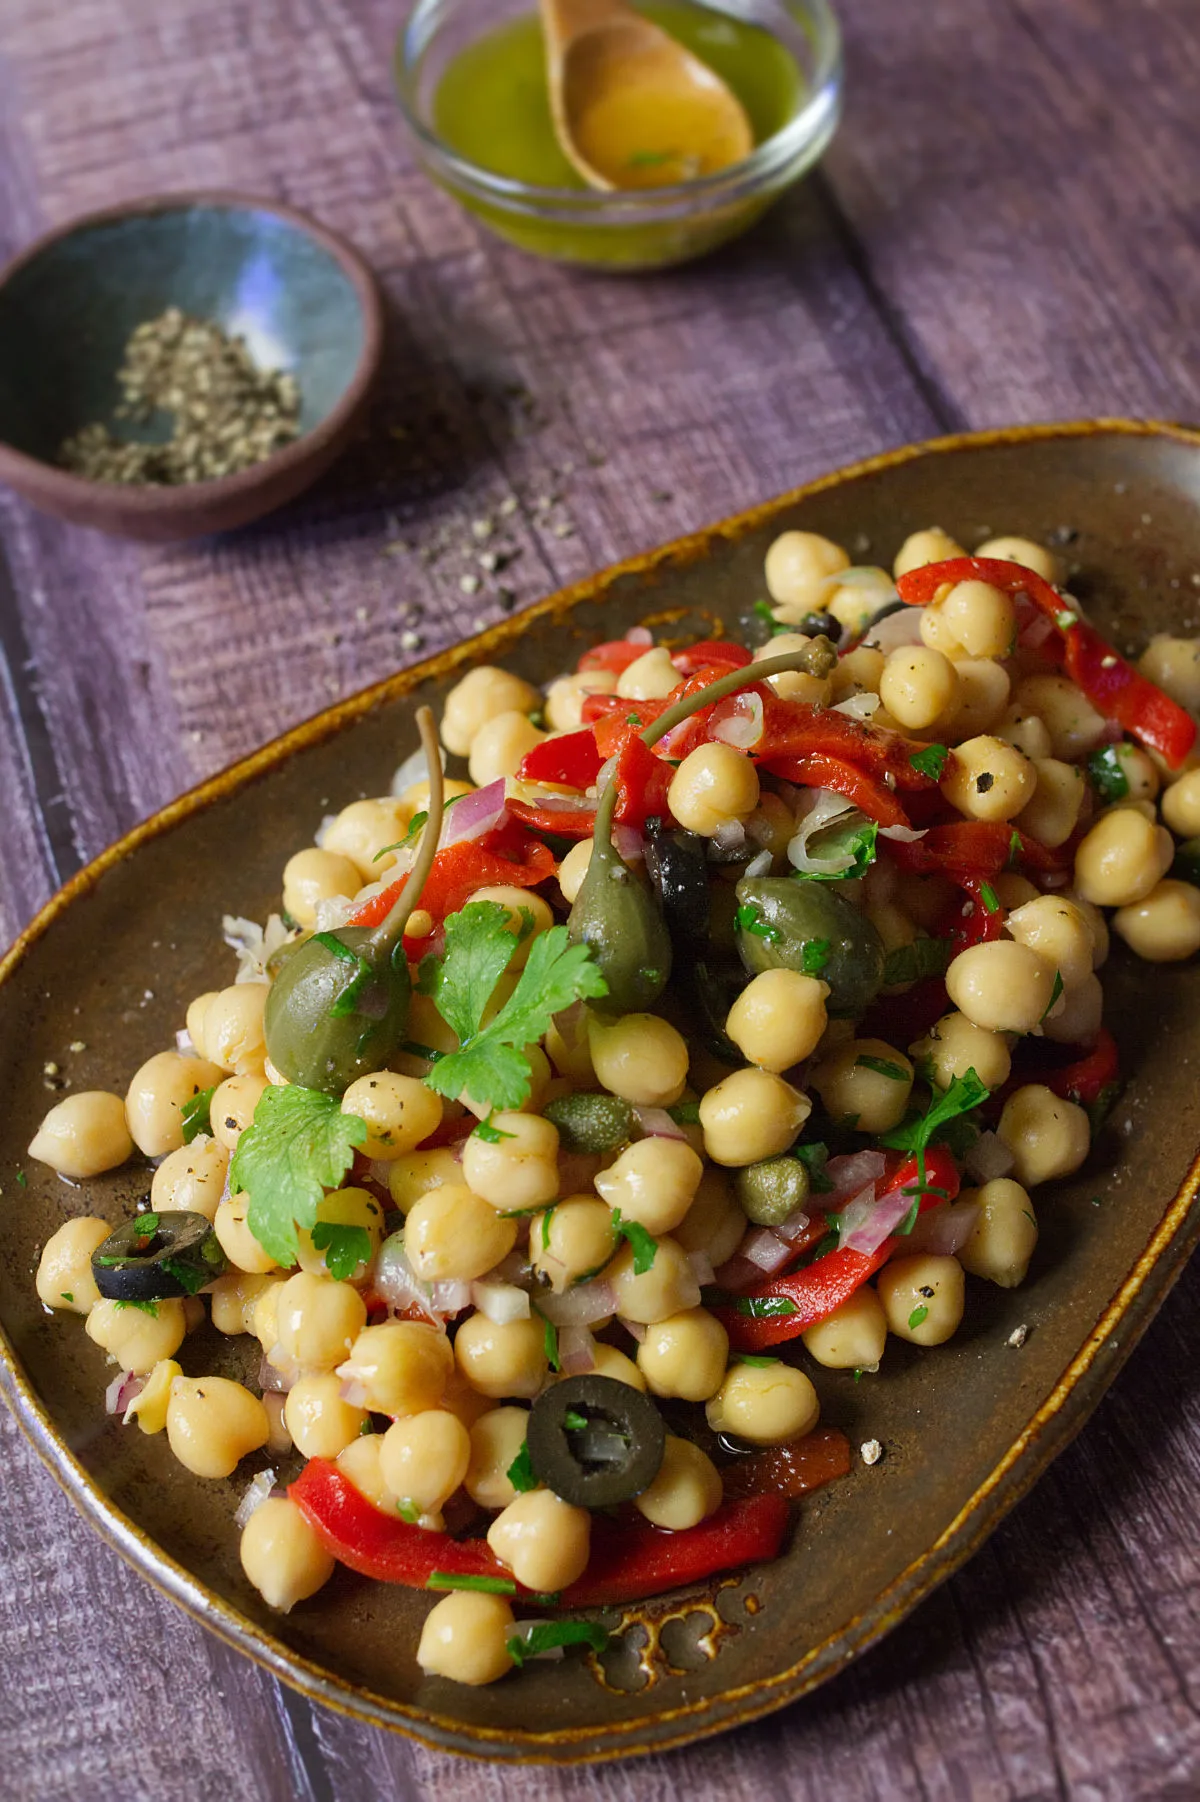 A dish of chickpea and caper salad